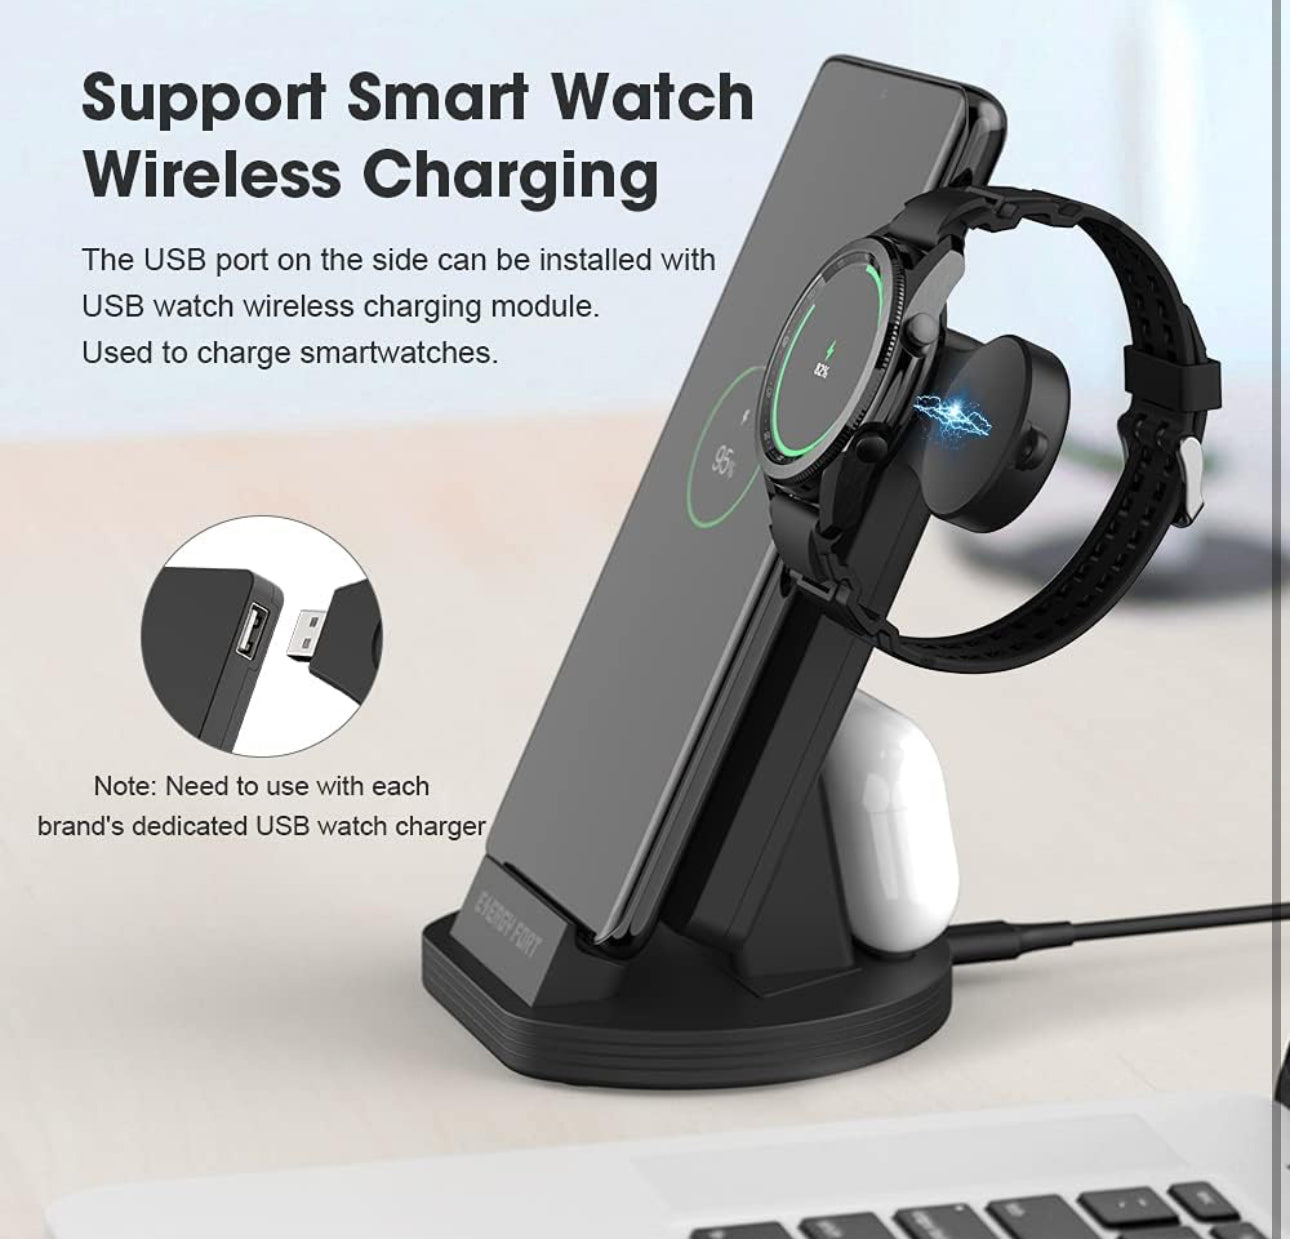 Energy Fort 3-in-1 Wireless Charger Station Dock for Samsung, Huawei, USB C Magnetic Charging and Wireless Charging for AirPods Pro/Qi Phones, Send USB Watch Charger